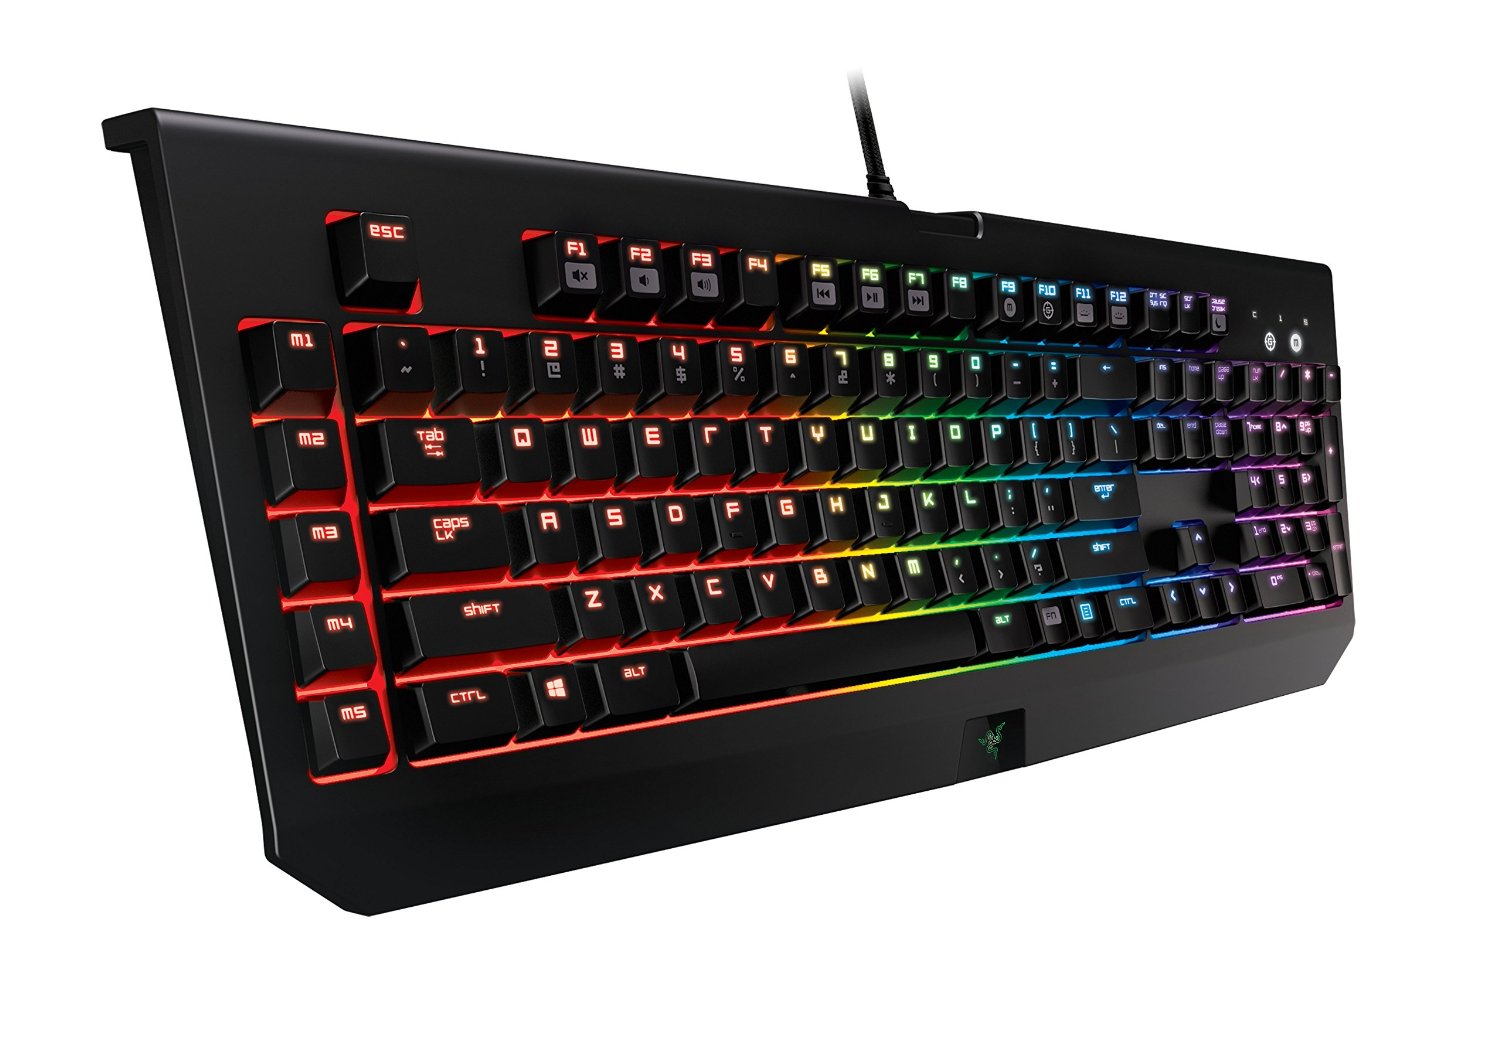   Razer BlackWidow Chroma Clicky Mechanical Gaming Keyboard - Fully Programmable and 5 Macro Keys - GAMING GIFT IDEAS - THE ULTIMATE GIFT LIST FOR MODERN MEN